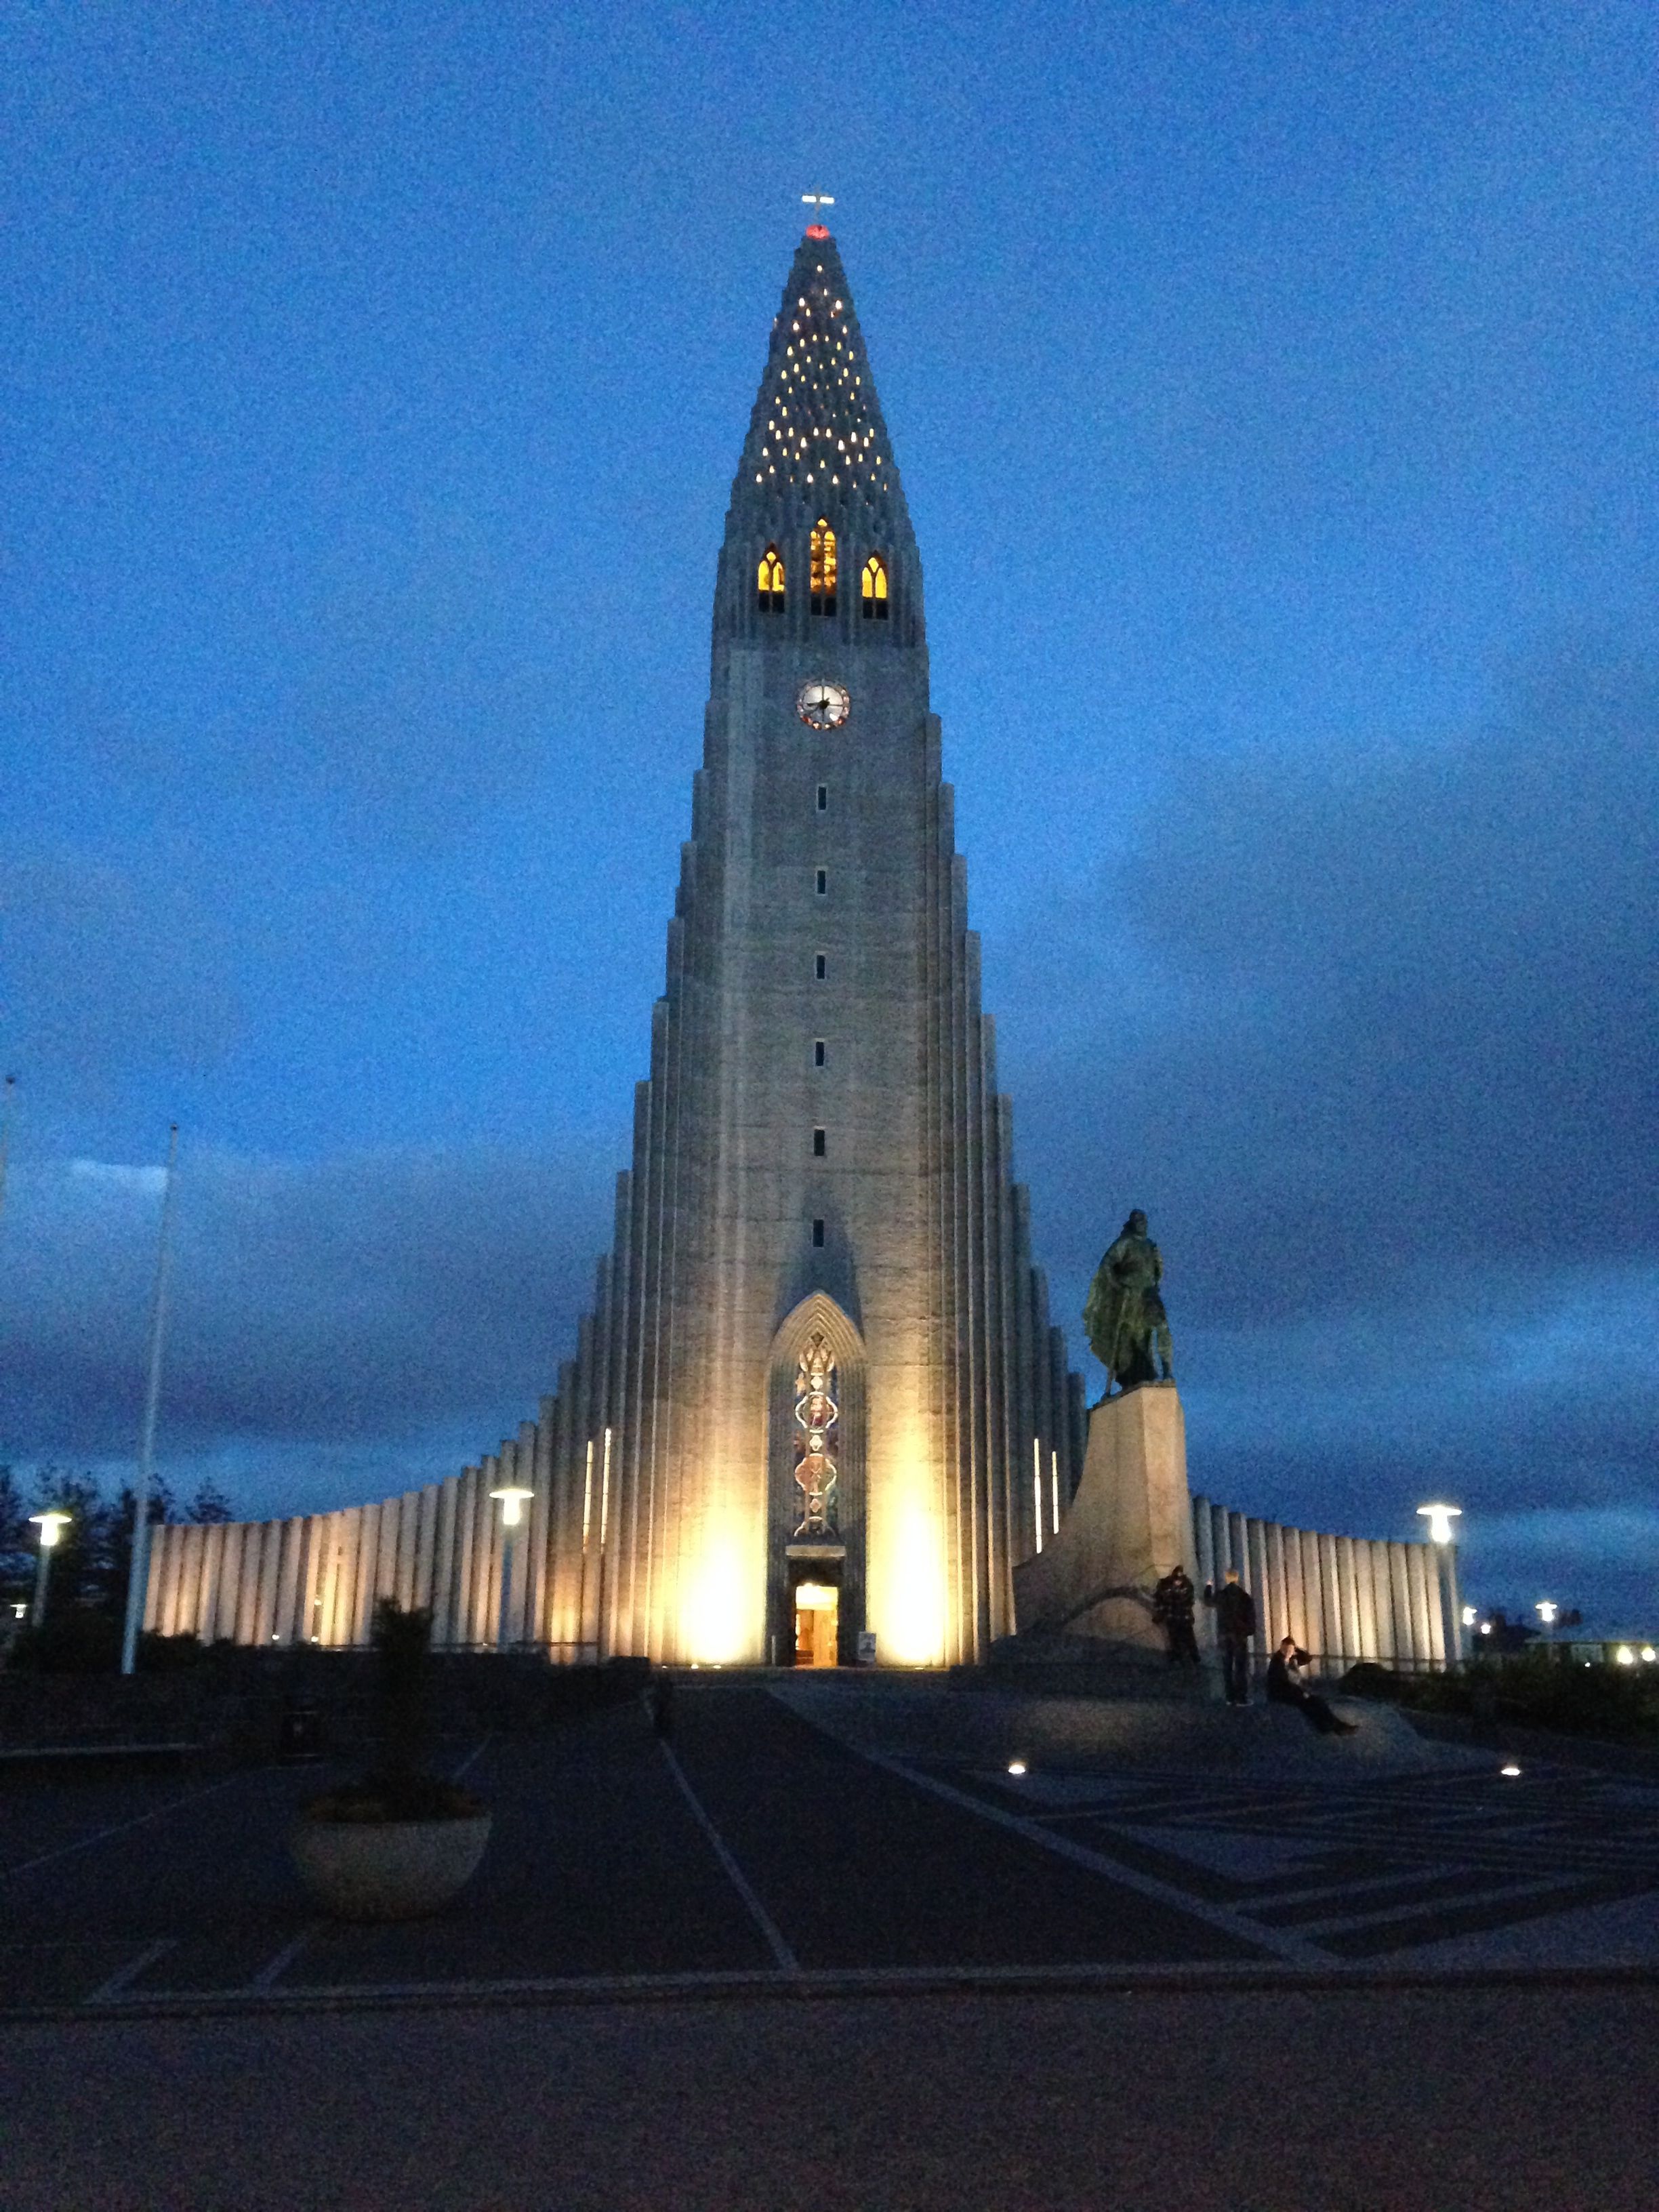 Hallgrímskirkja at night. Located at the top of a hill in Reykjavik's historic district.